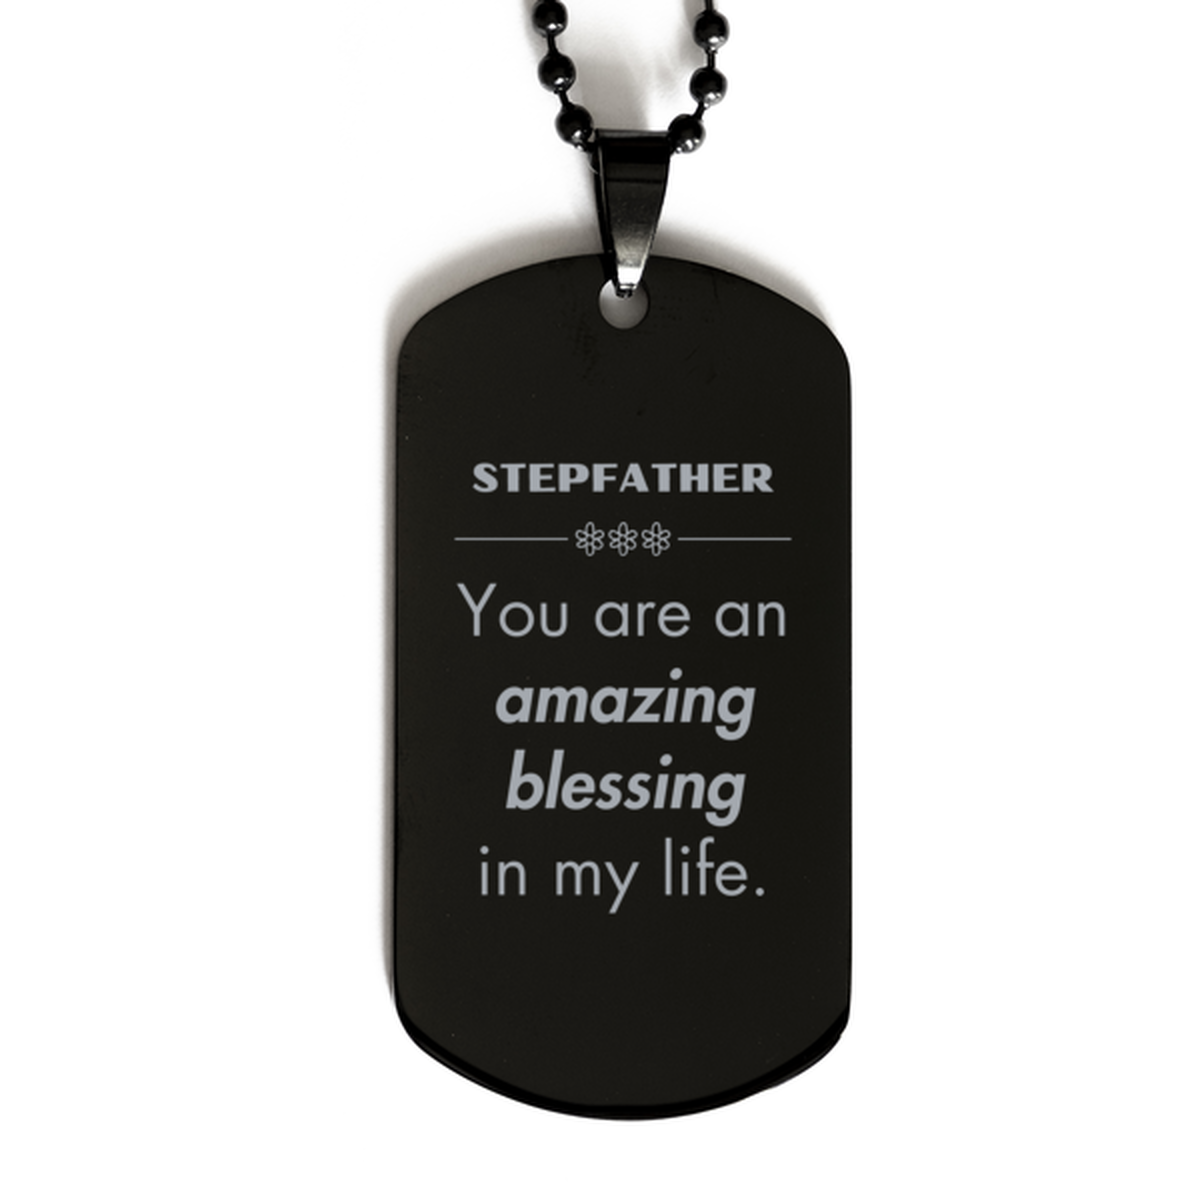 Stepfather Black Dog Tag, You are an amazing blessing in my life, Thank You Gifts For Stepfather, Inspirational Birthday Christmas Unique Gifts For Stepfather